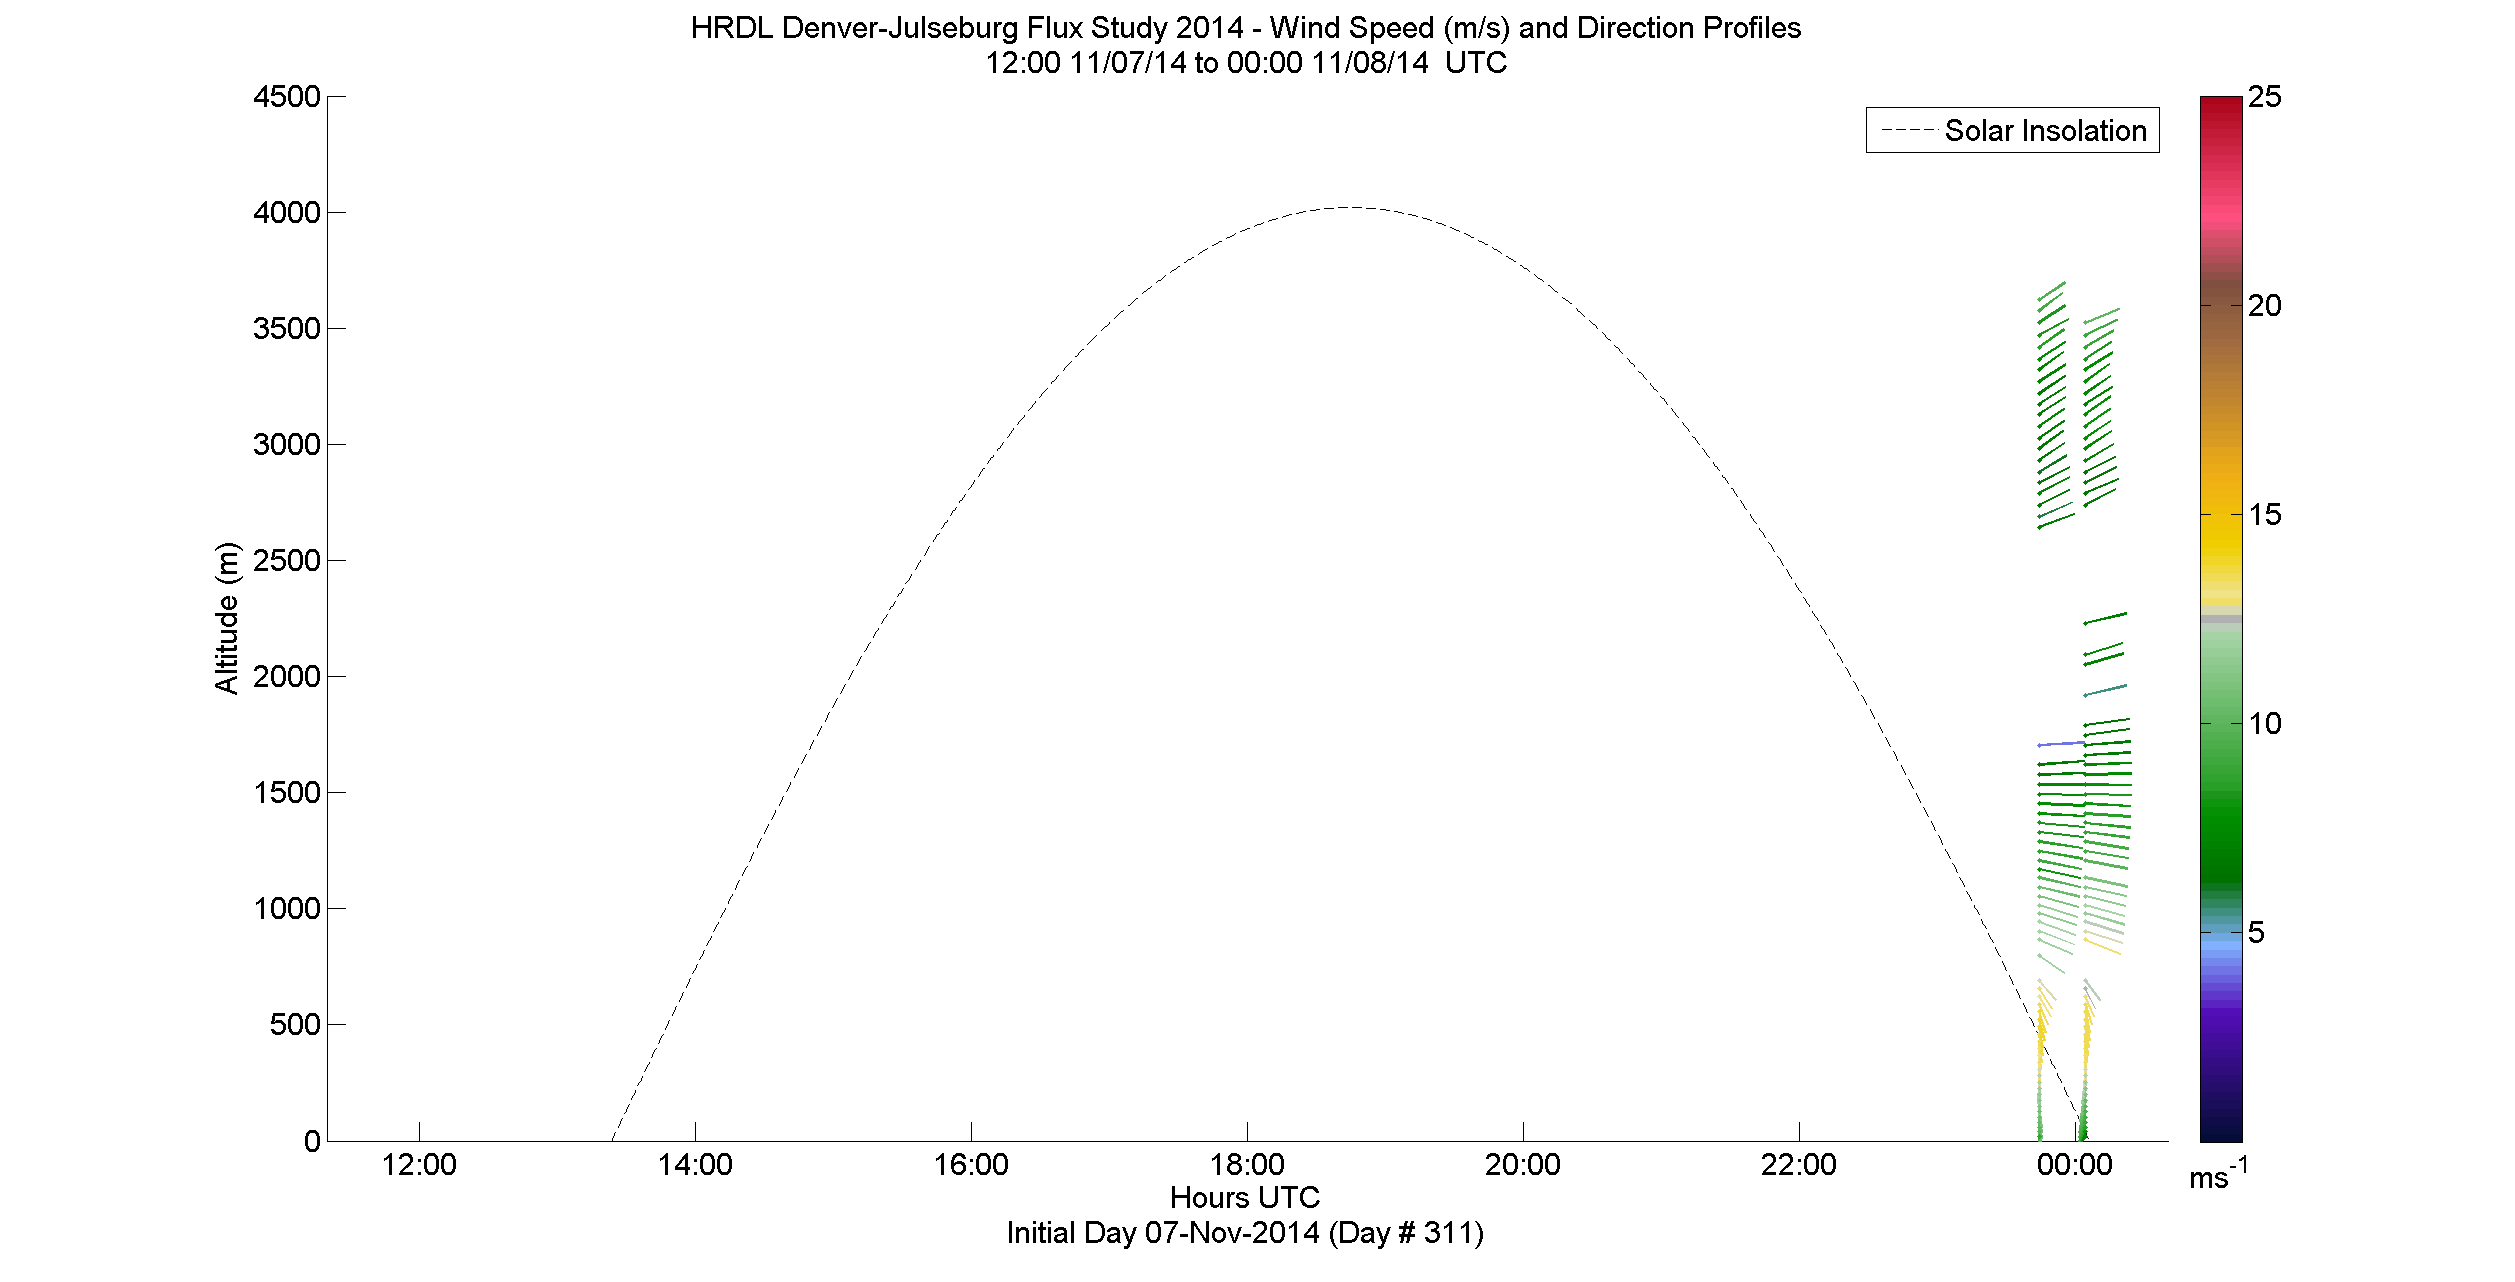 HRDL speed and direction profile - November 7 pm